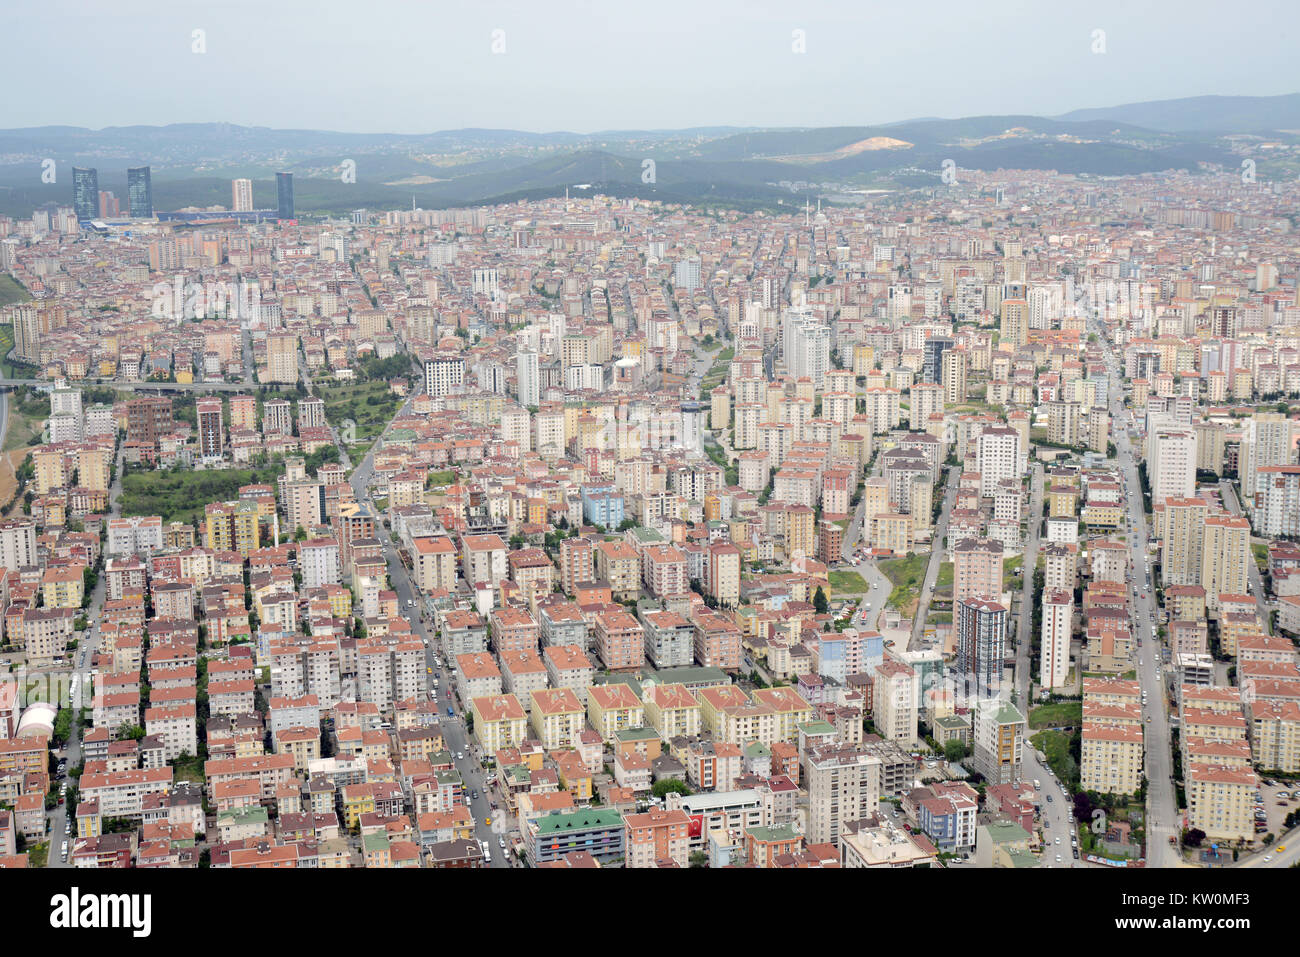 MAY 09,2017 ISTANBUL.Aerial view of Atasehir district of Istanbul Turkey. Stock Photo